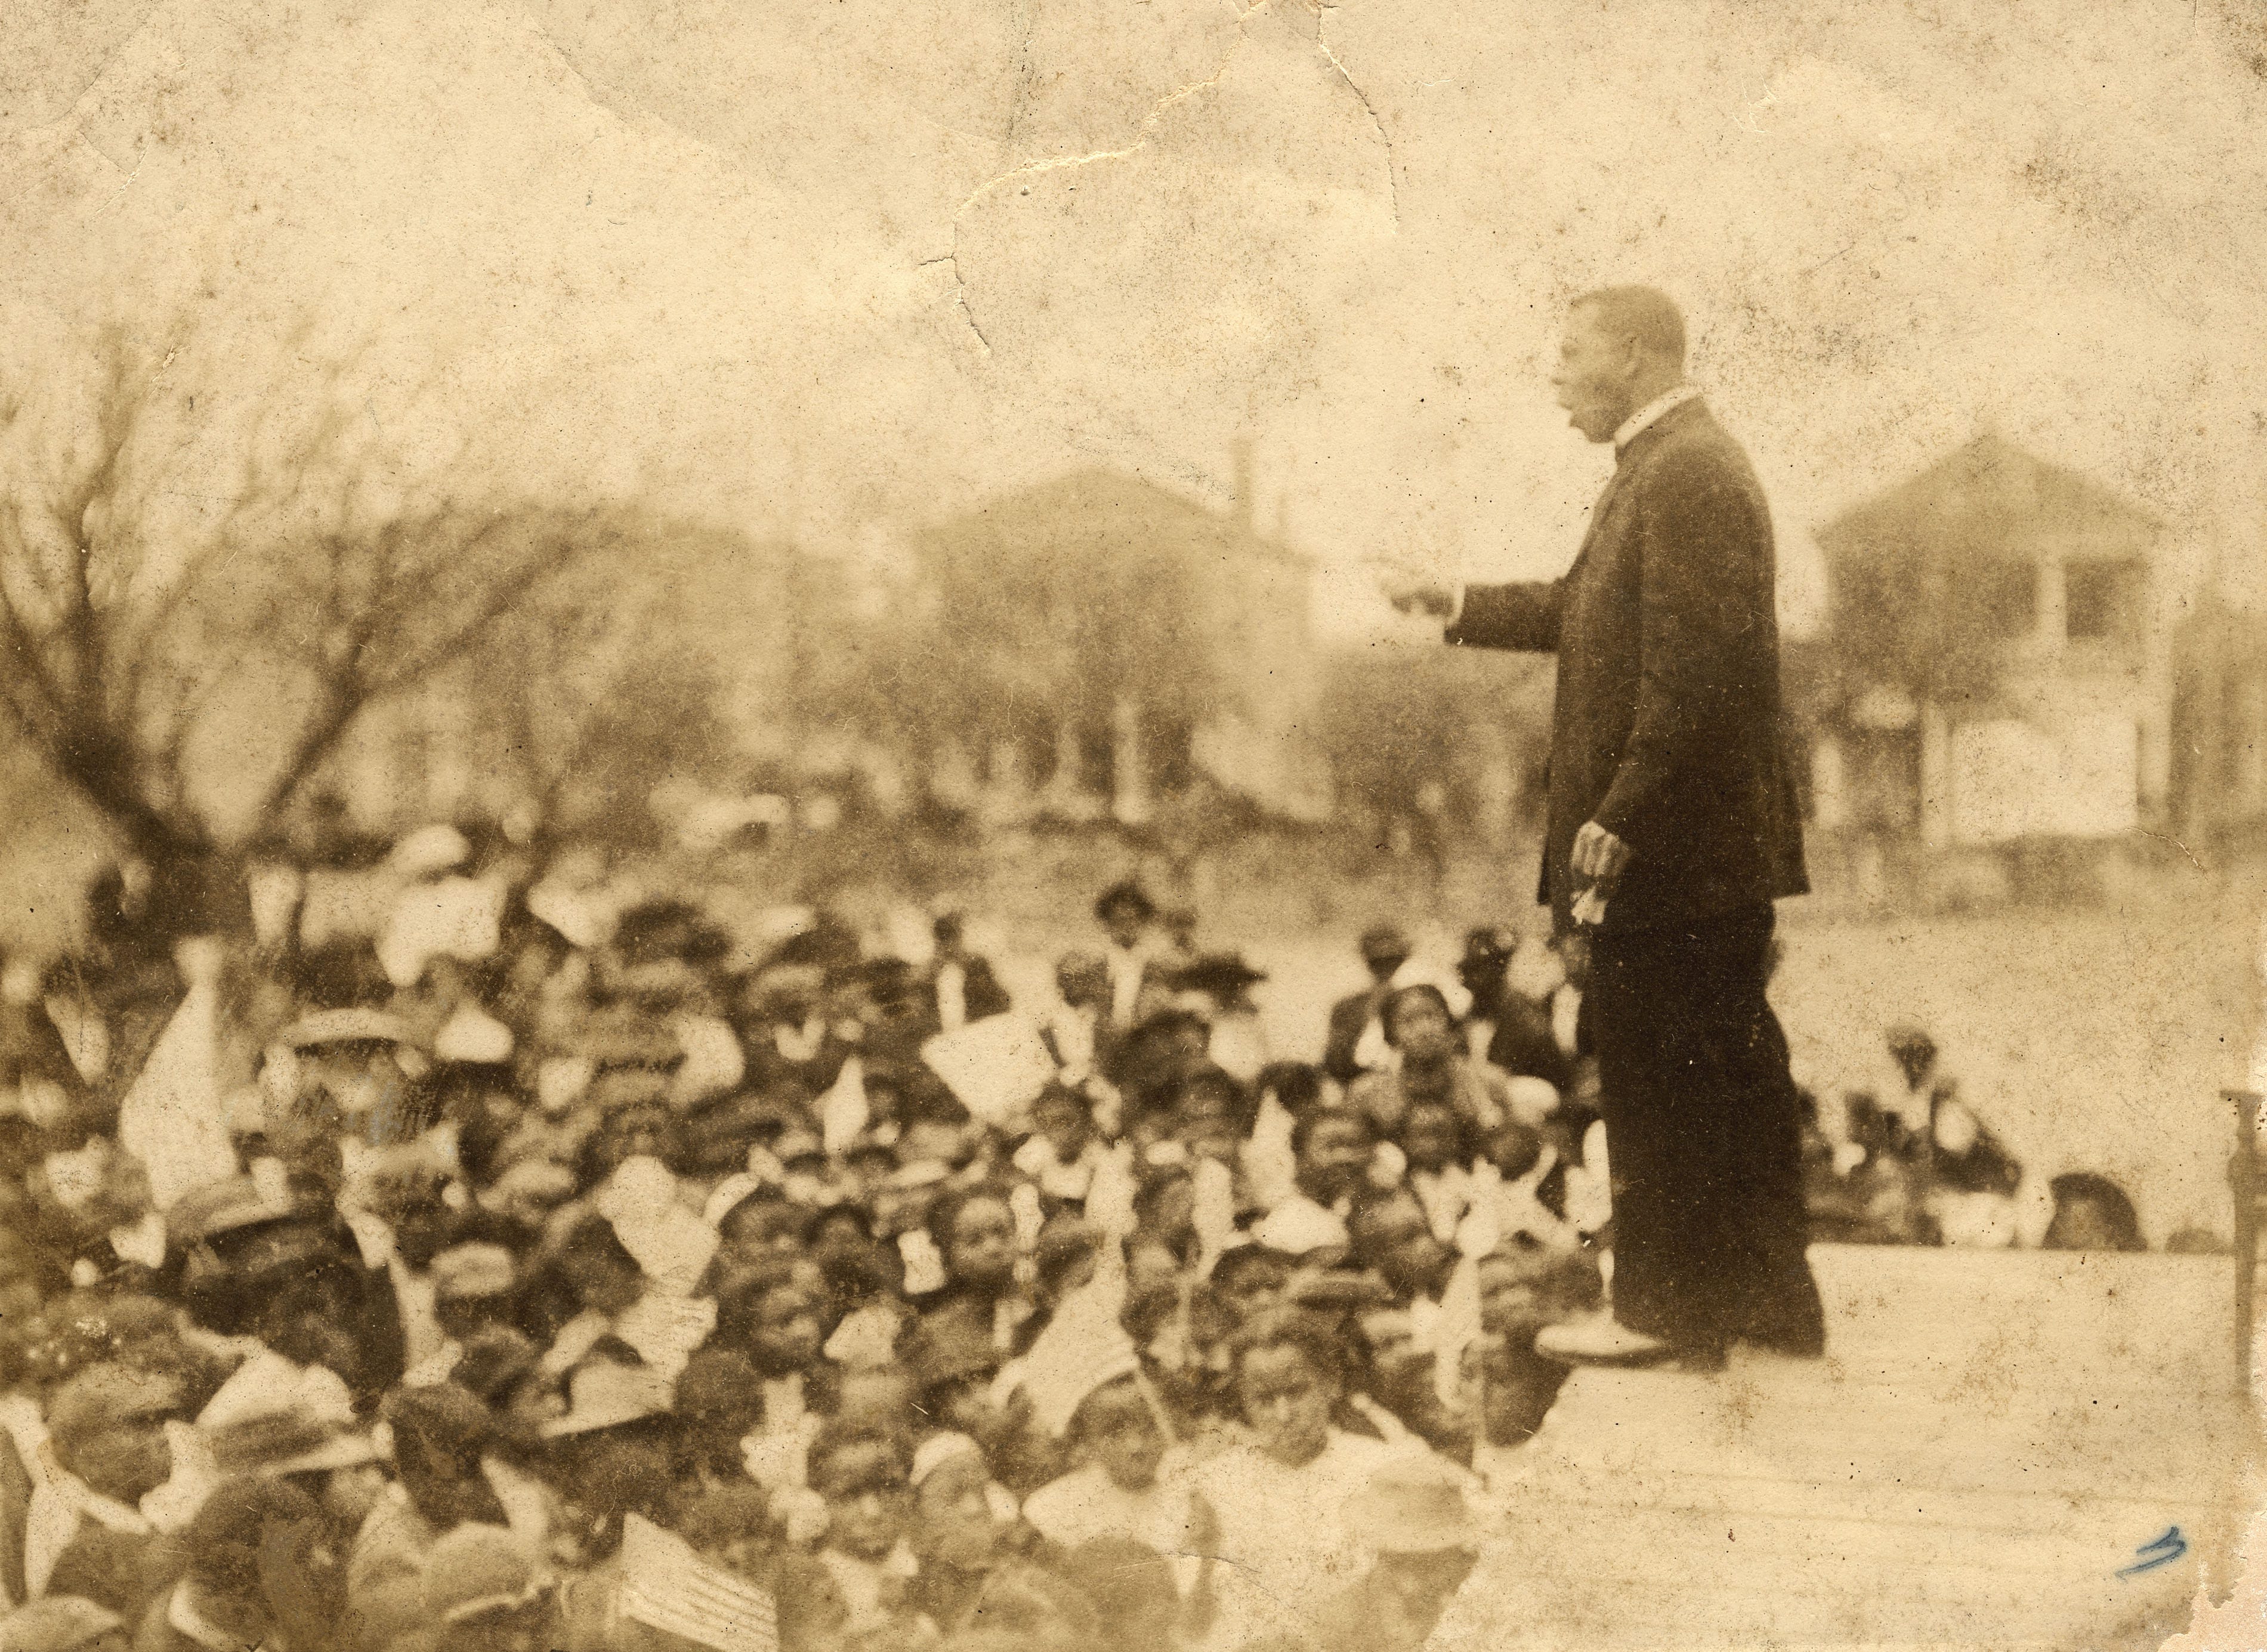 Booker T. Washington, the president of Tuskegee Institute, addresses a crowd in an undated photo. In public, Washington downplayed political activism as a way for Black Americans to reclaim their constitutional rights. In private, Washington funded numerous challenges to Jim Crow laws, and supported Jackson Giles' challenge to Alabama's constitution. Washington's role in Giles' case would not be known for more than 50 years.